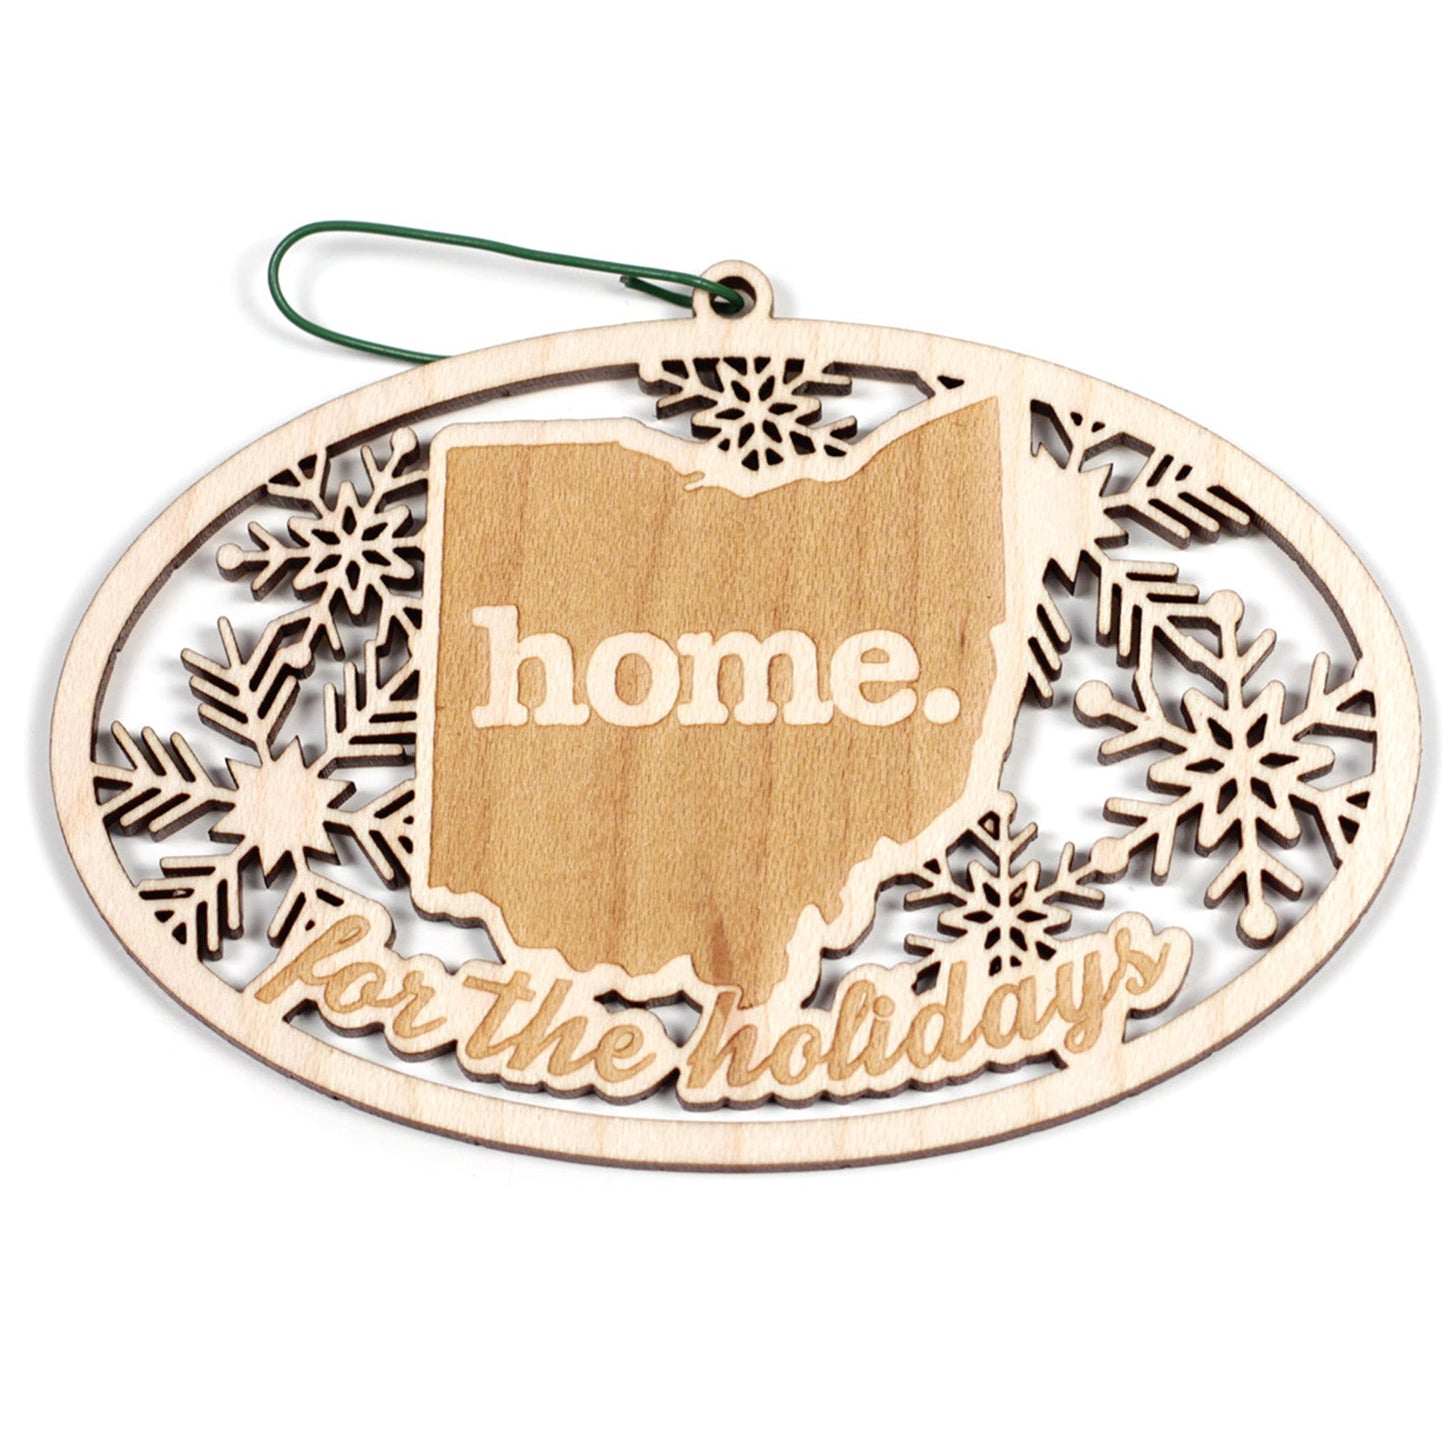 Wooden Holiday Ornament - Ohio